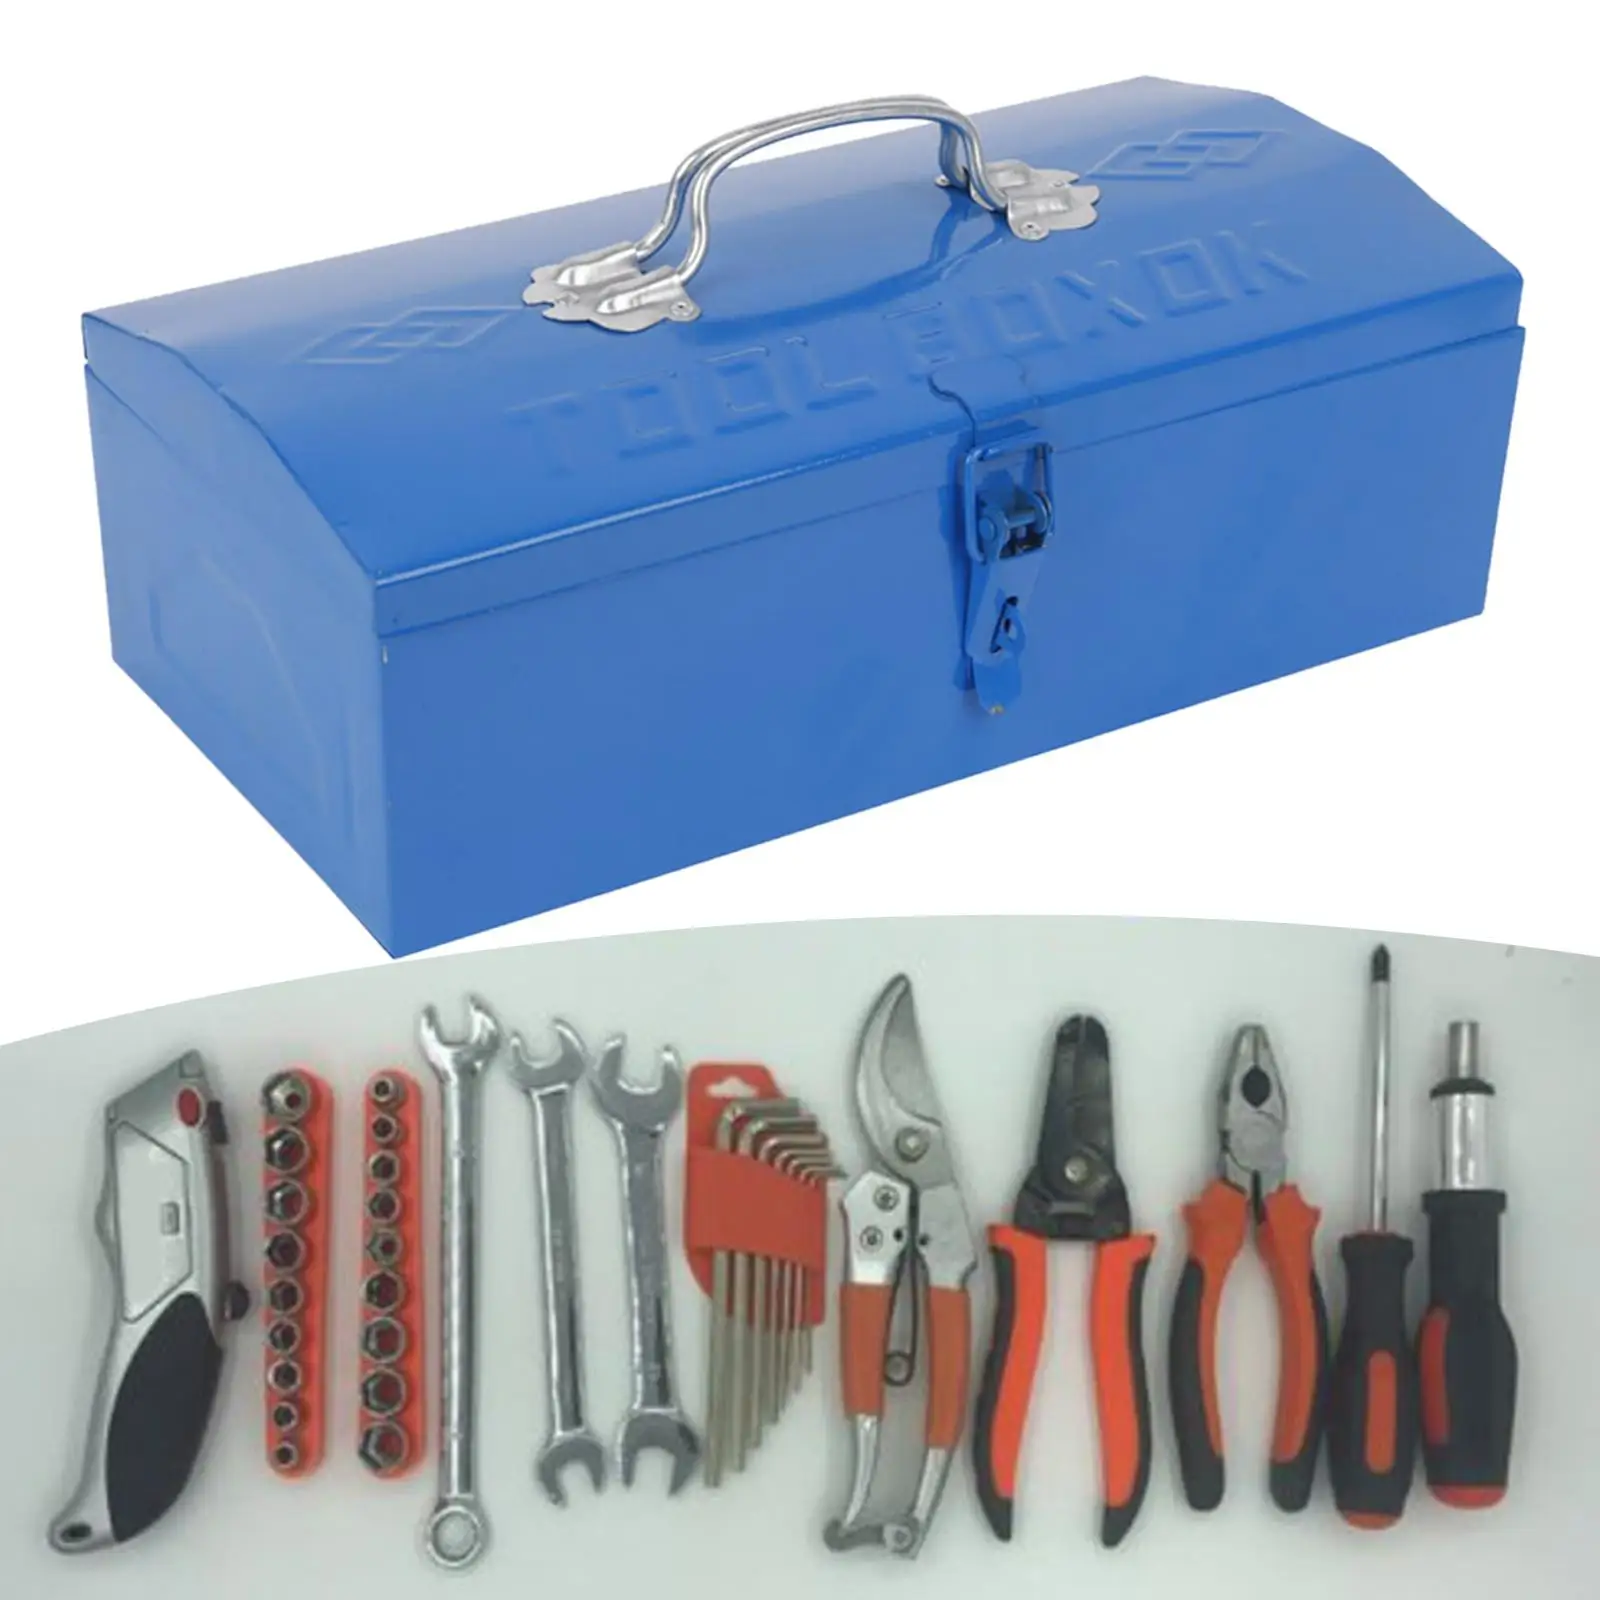 Iron Tool Box with Folding Handle Large Capacity Heavy Duty Multipurpose Portable Tool Storage Box Tool Case for Garage Workshop